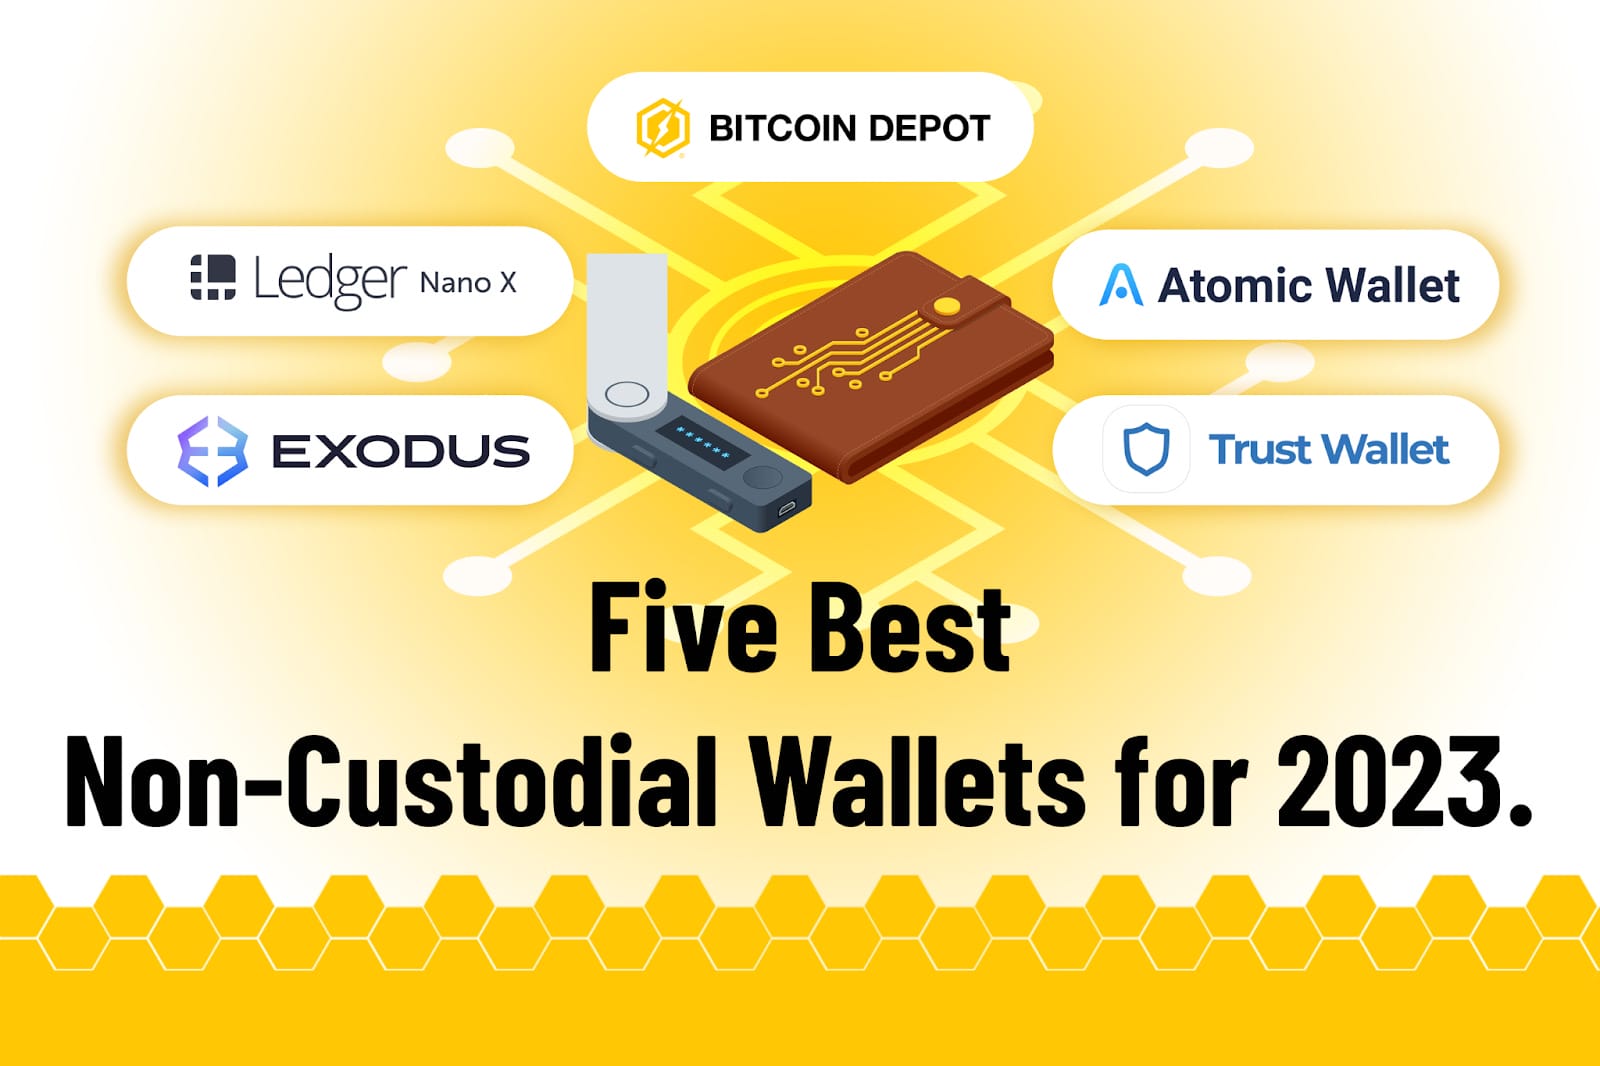 Header image for the five best non-custodial wallets